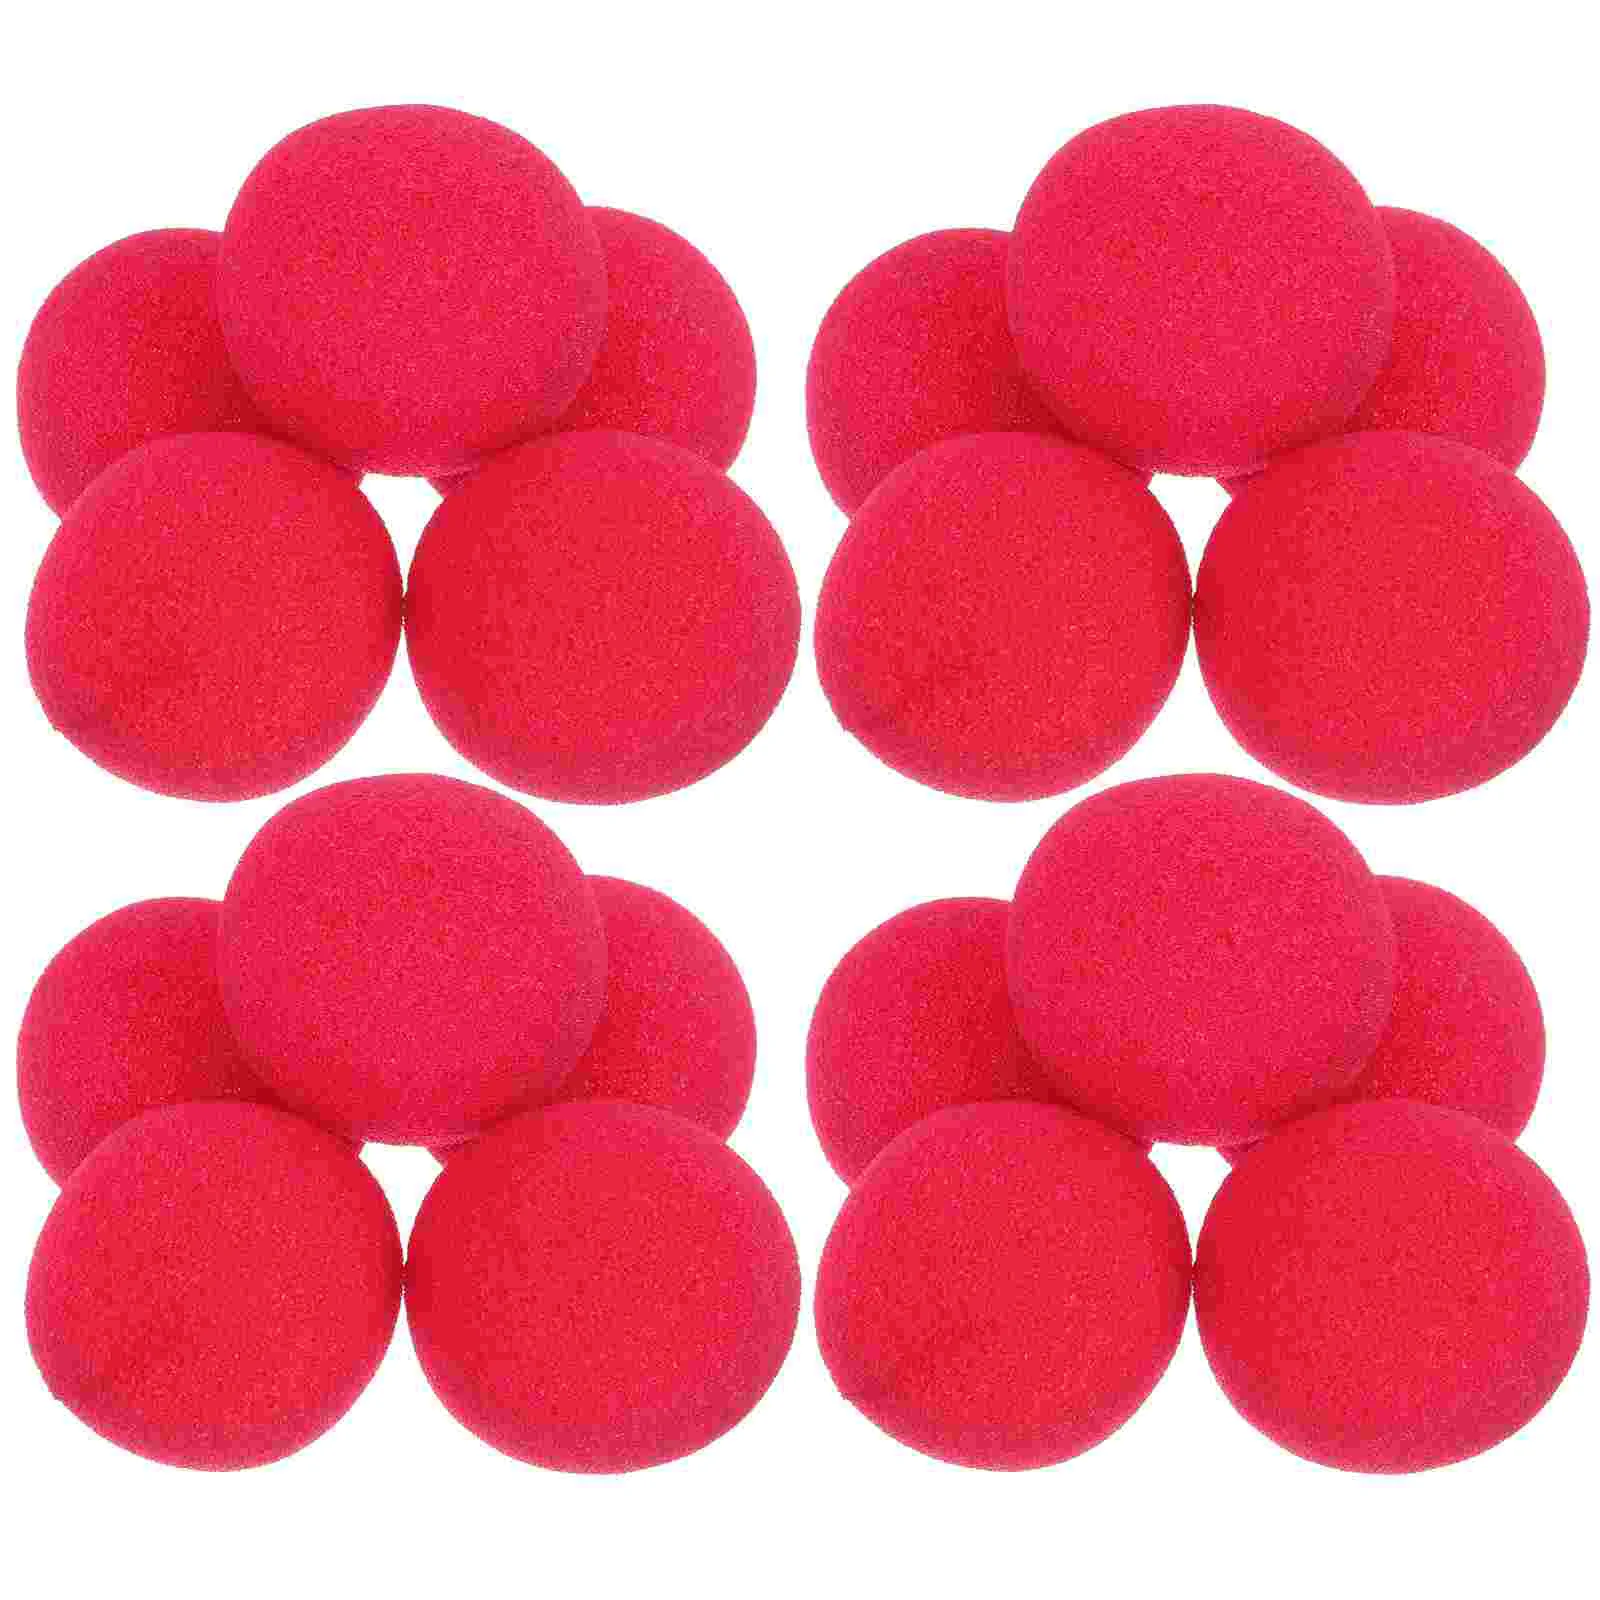 

25 Pcs Red Clown Nose Foam Small Prop Circus Noses Party Sponge Cosplay Plaything